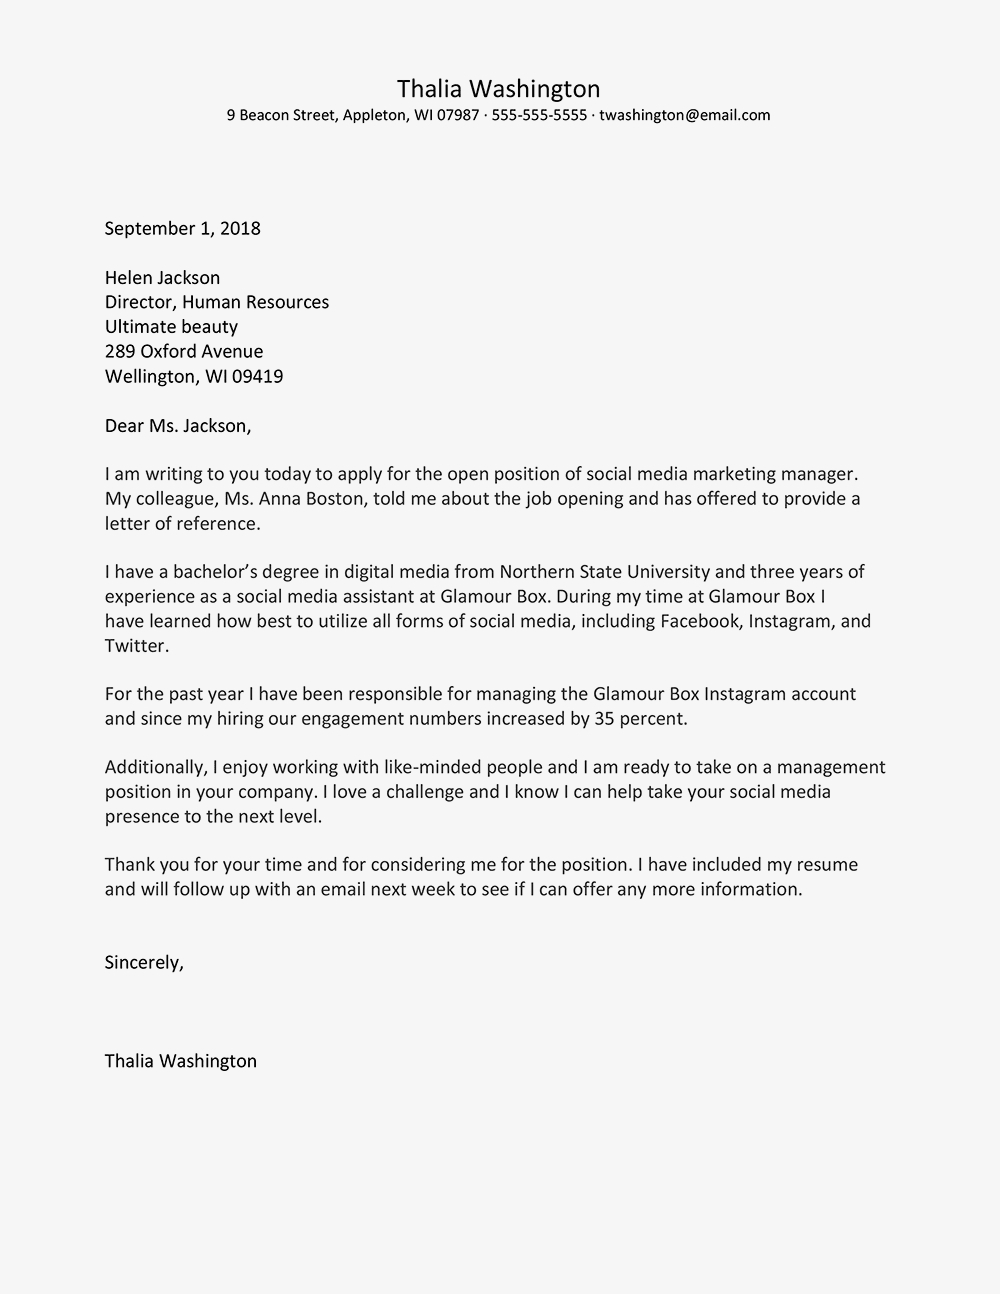 Letter Of Interest Template Microsoft Word Examples For Letter Of Interest Template Microsoft Word